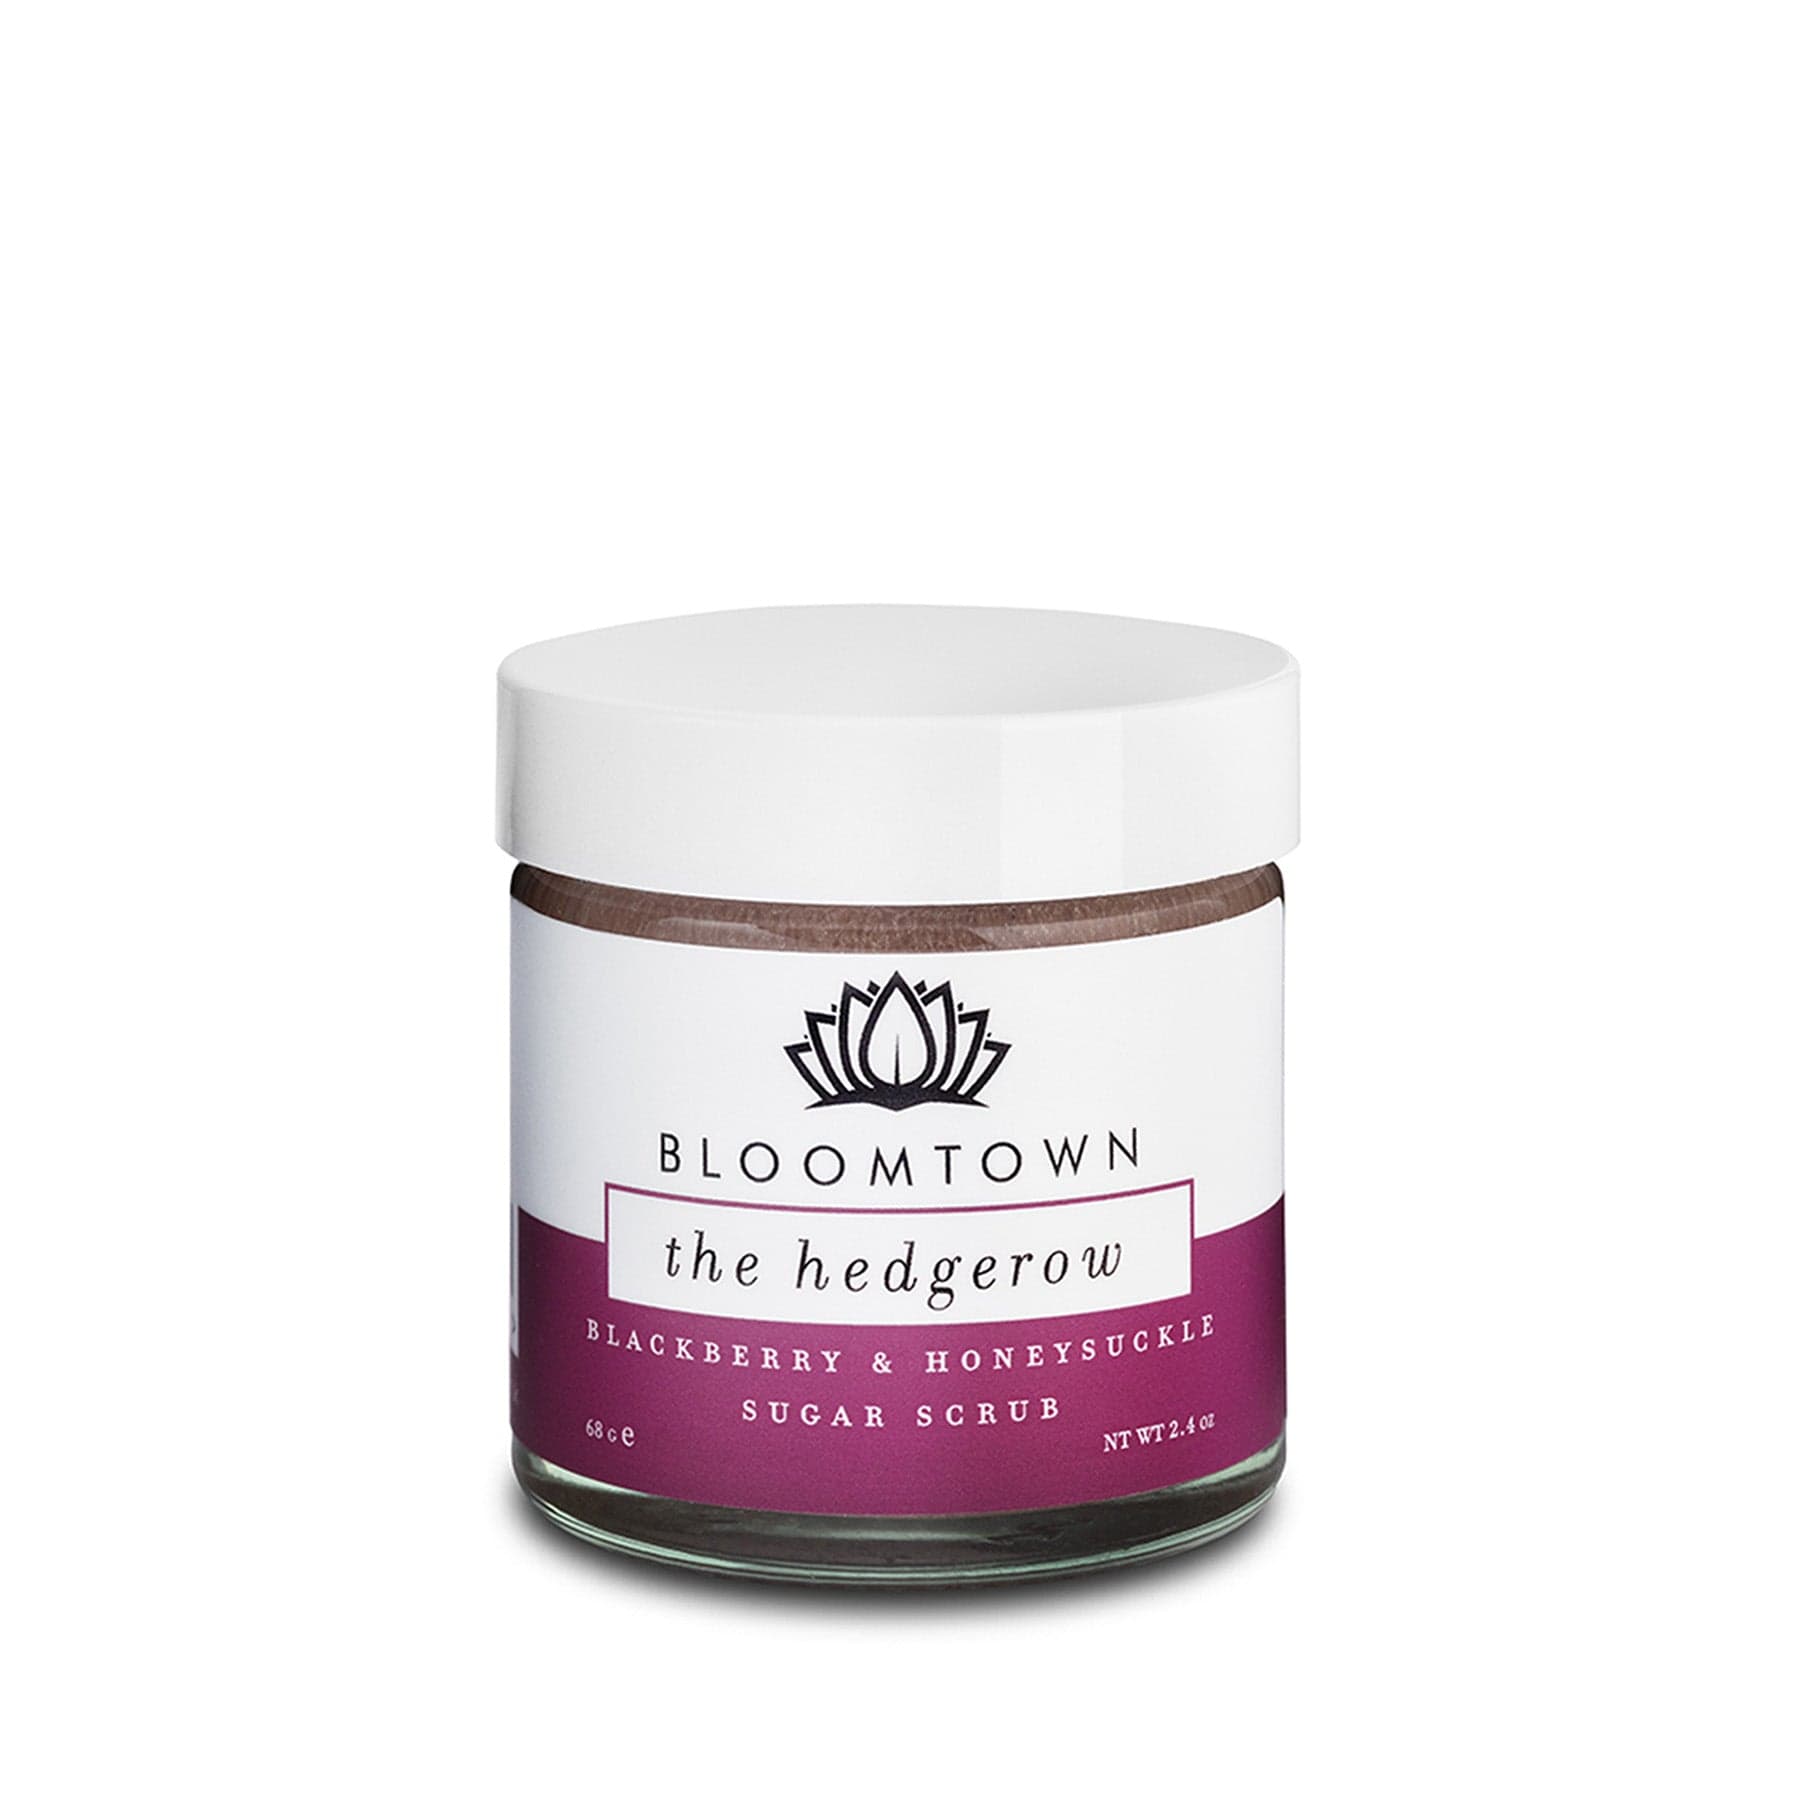 Bloomtown The Hedgerow Blackberry & Honeysuckle Sugar Scrub in white jar with maroon label on white background